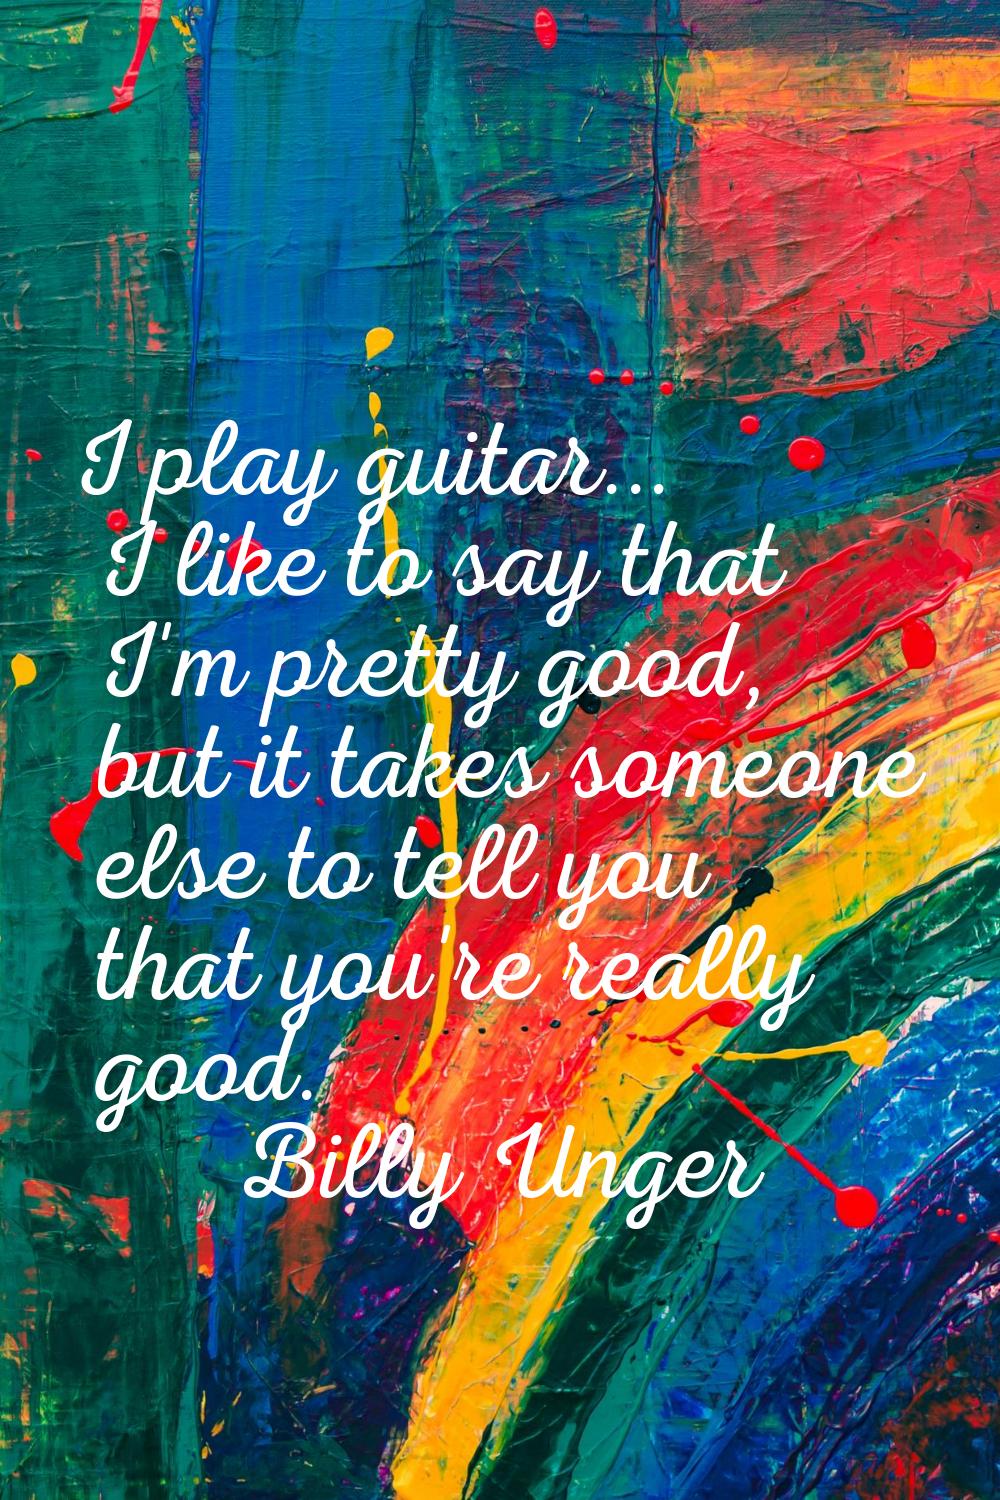 I play guitar... I like to say that I'm pretty good, but it takes someone else to tell you that you